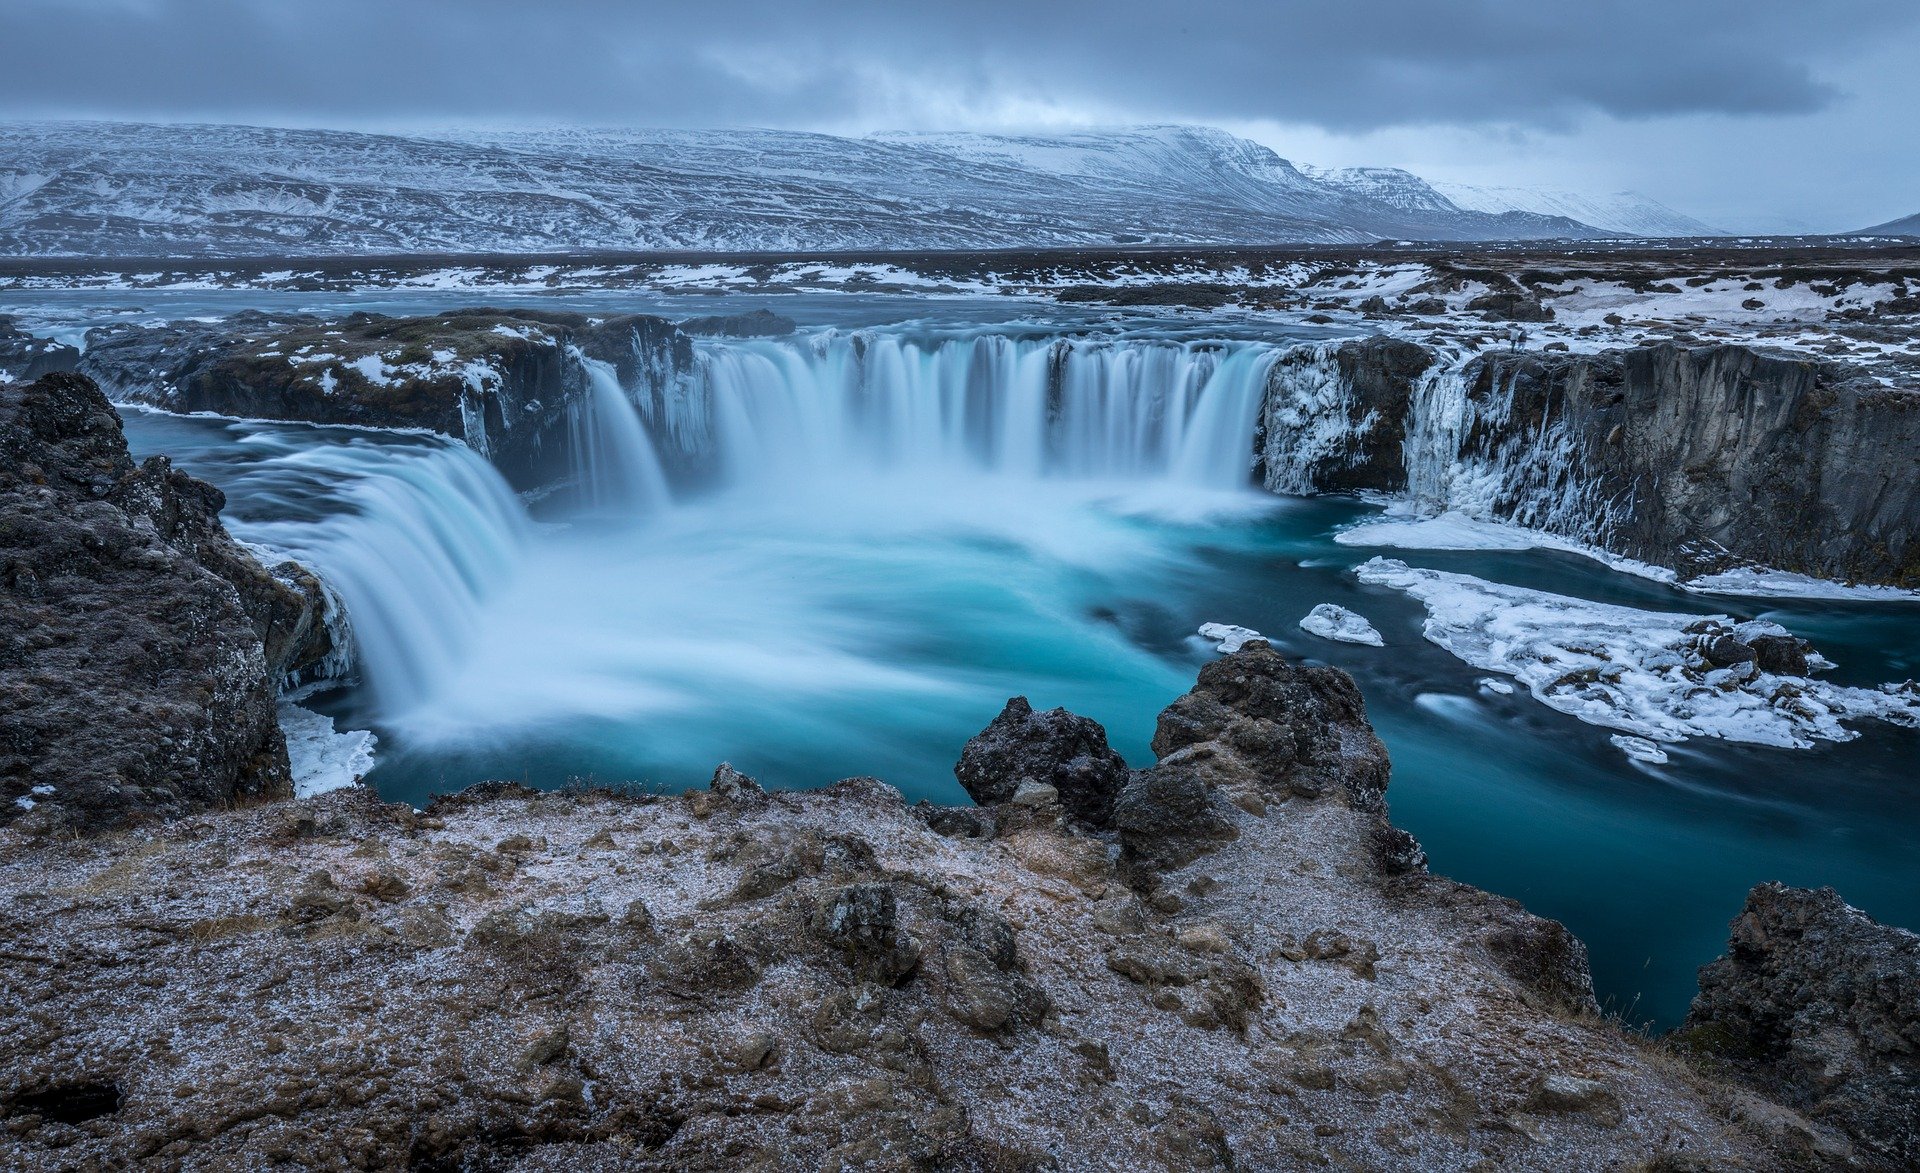 Which Uk Airports Fly Direct To Iceland? - The Getaway Lounge